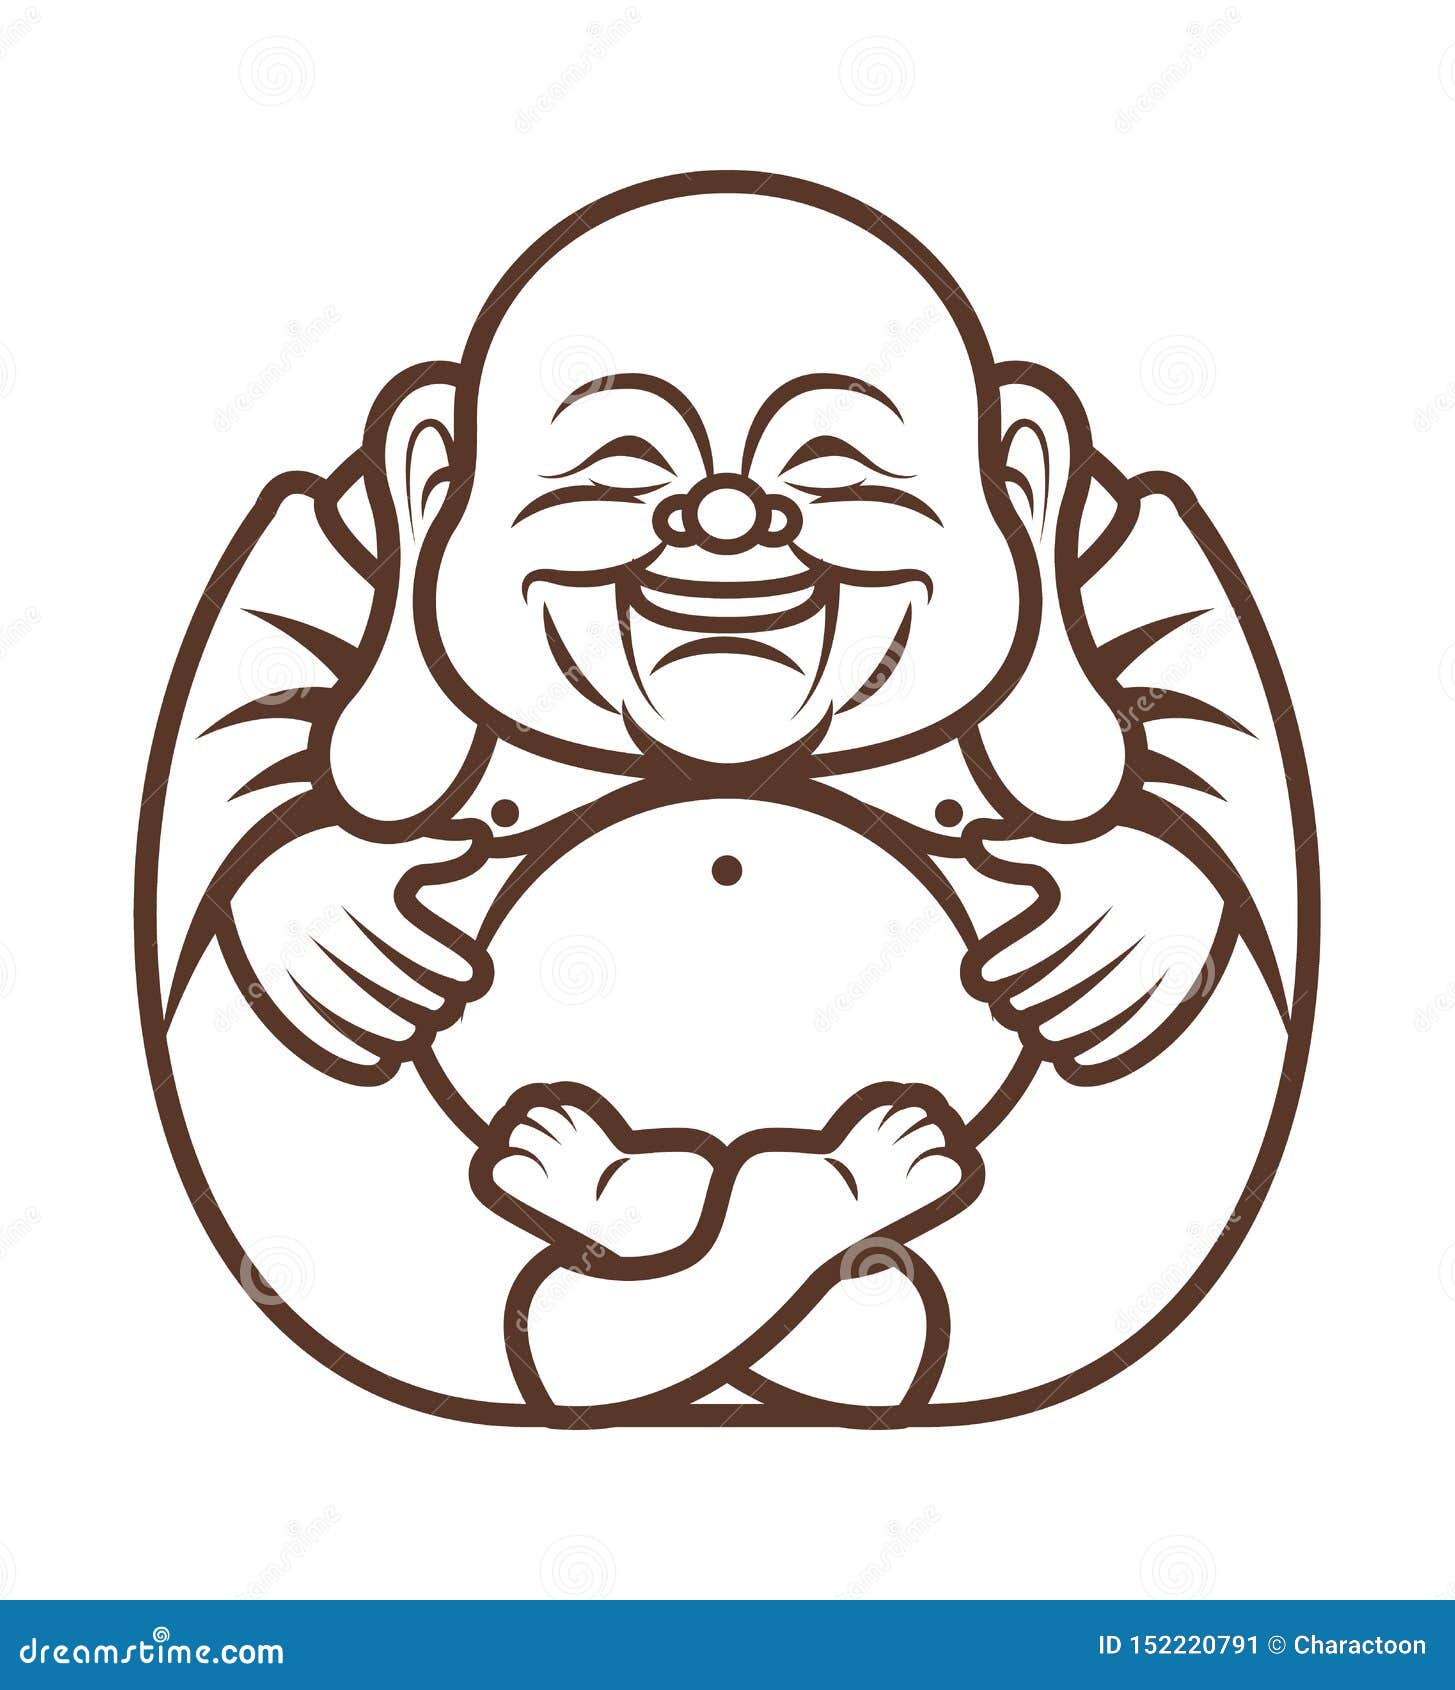 Featured image of post Art Laughing Buddha Drawing Look at links below to get more options for getting and using clip art